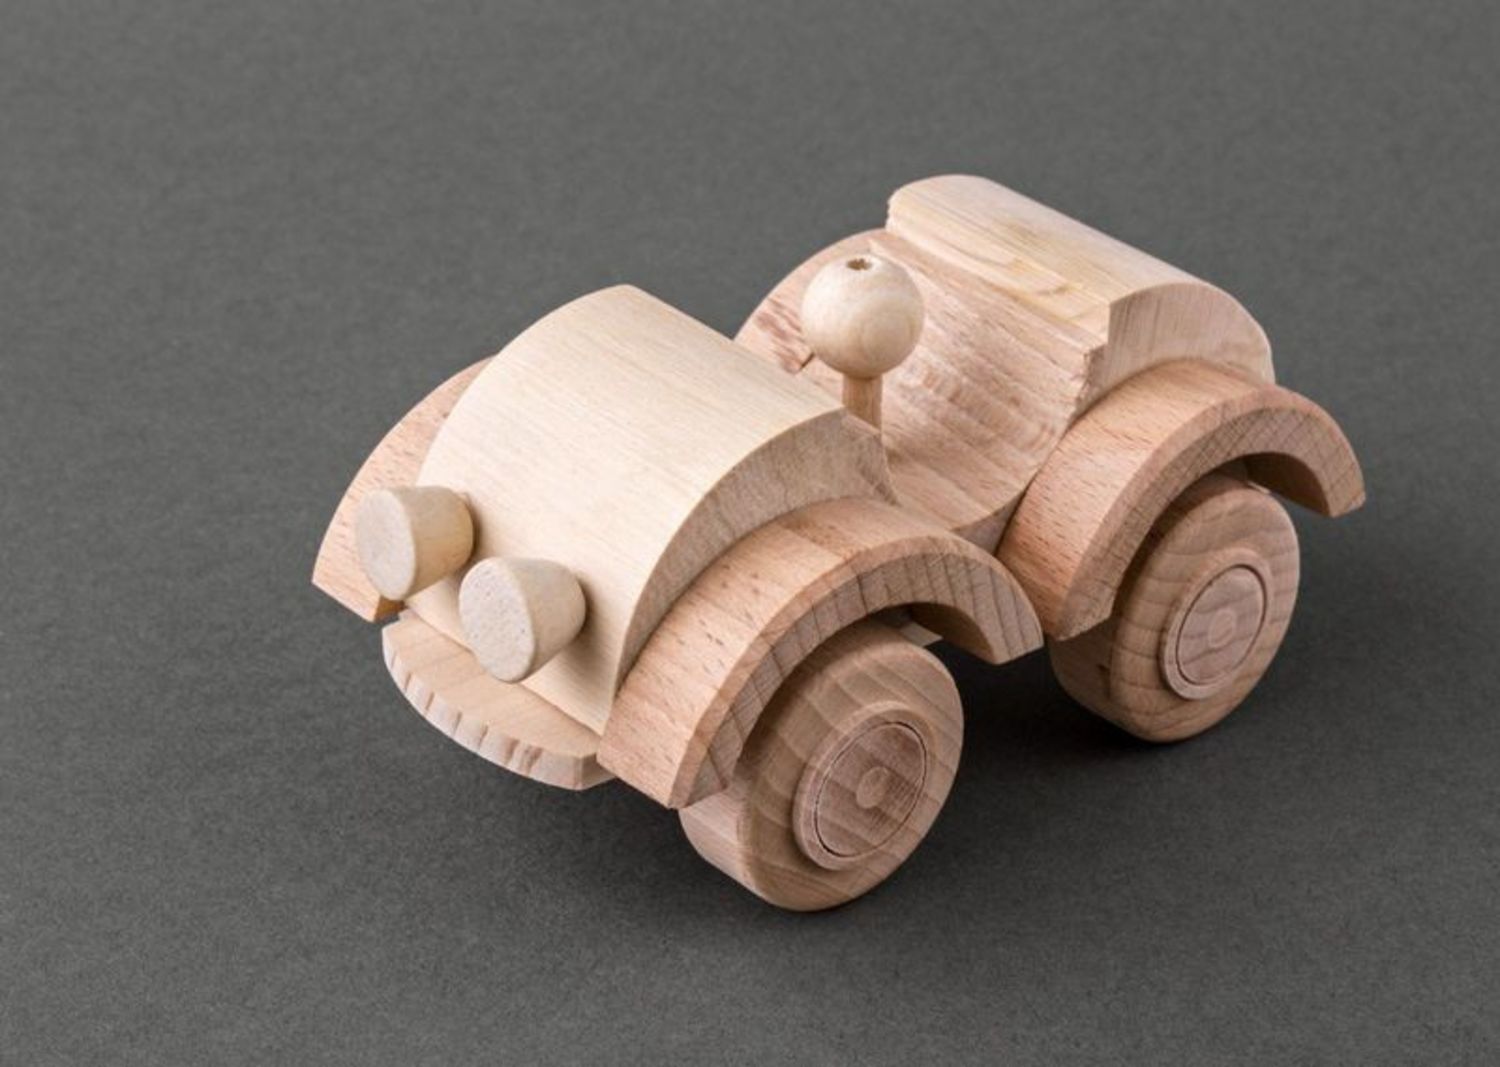 Toy car made of wood photo 6